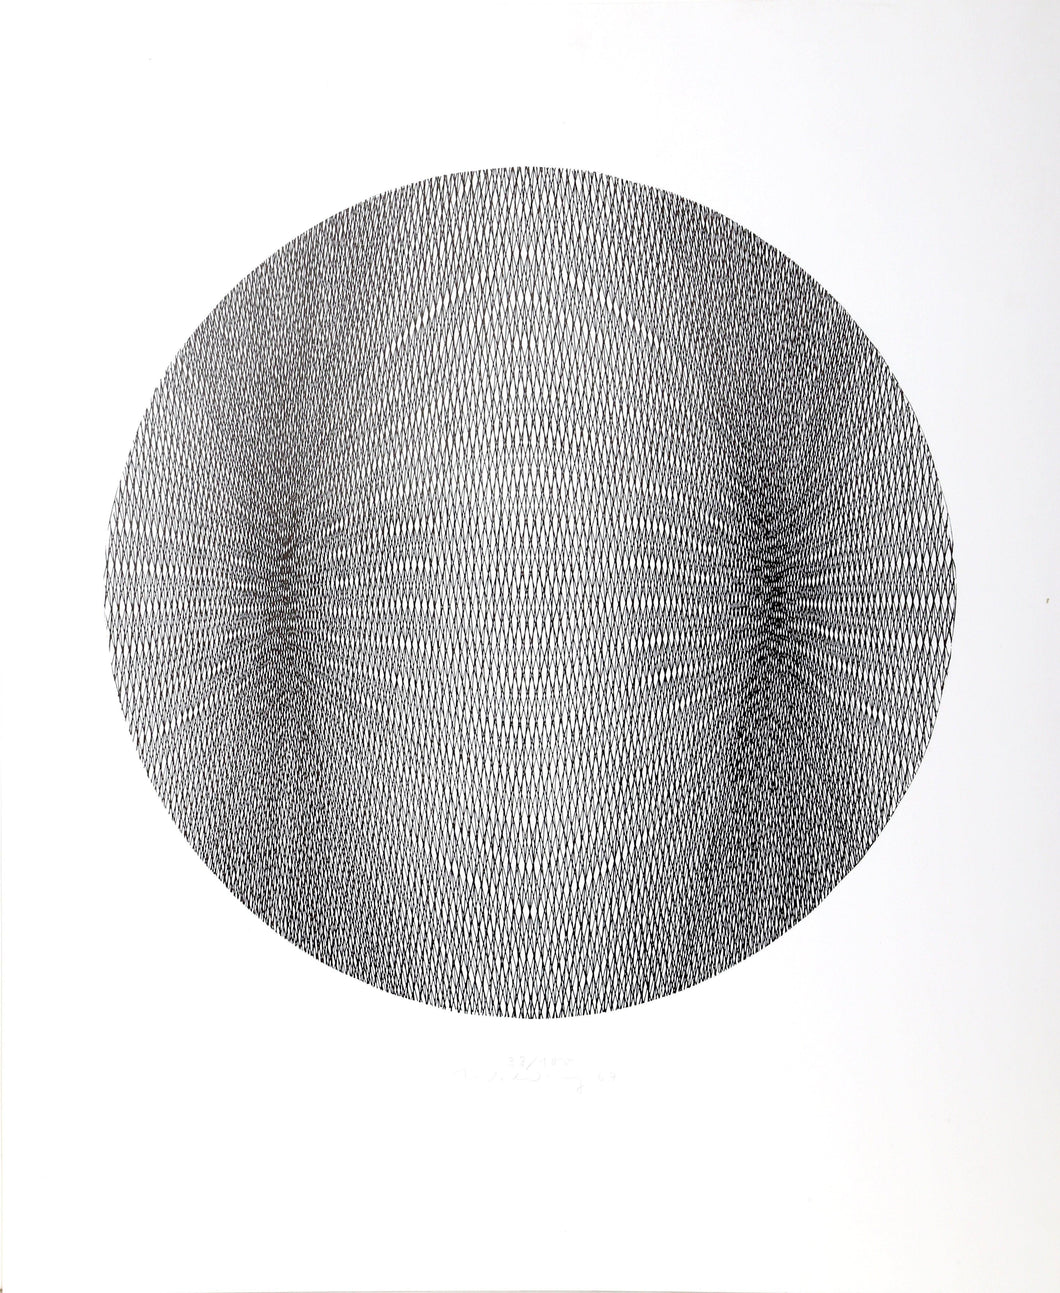 Untitled - Circle Lithograph | Ludwig Wilding,{{product.type}}